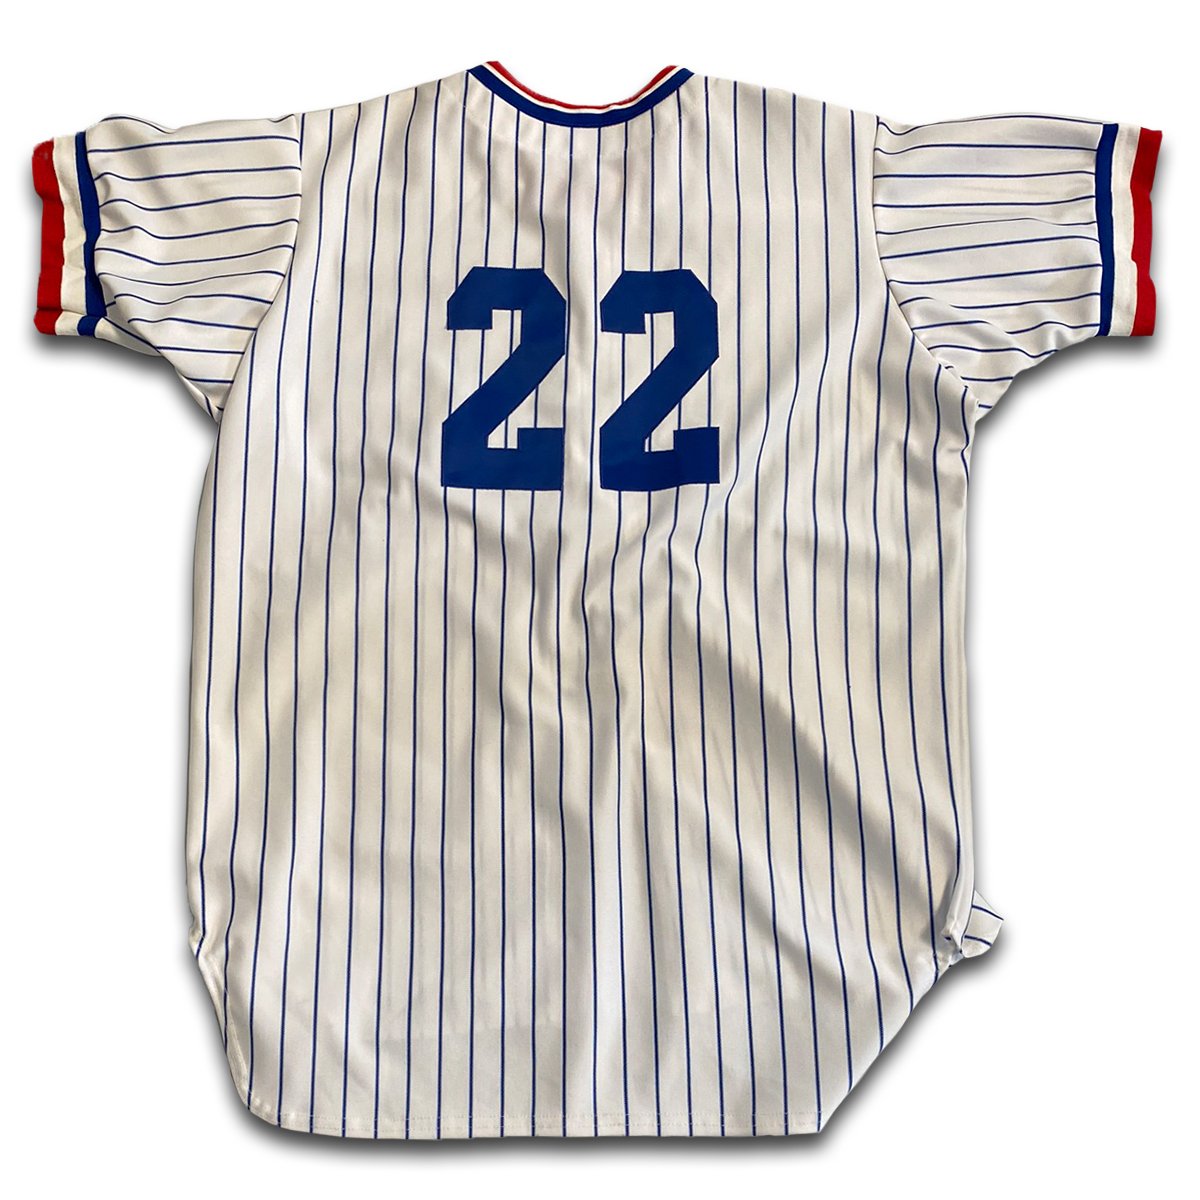 Collectible New York Yankees Jerseys for sale near Chattanooga